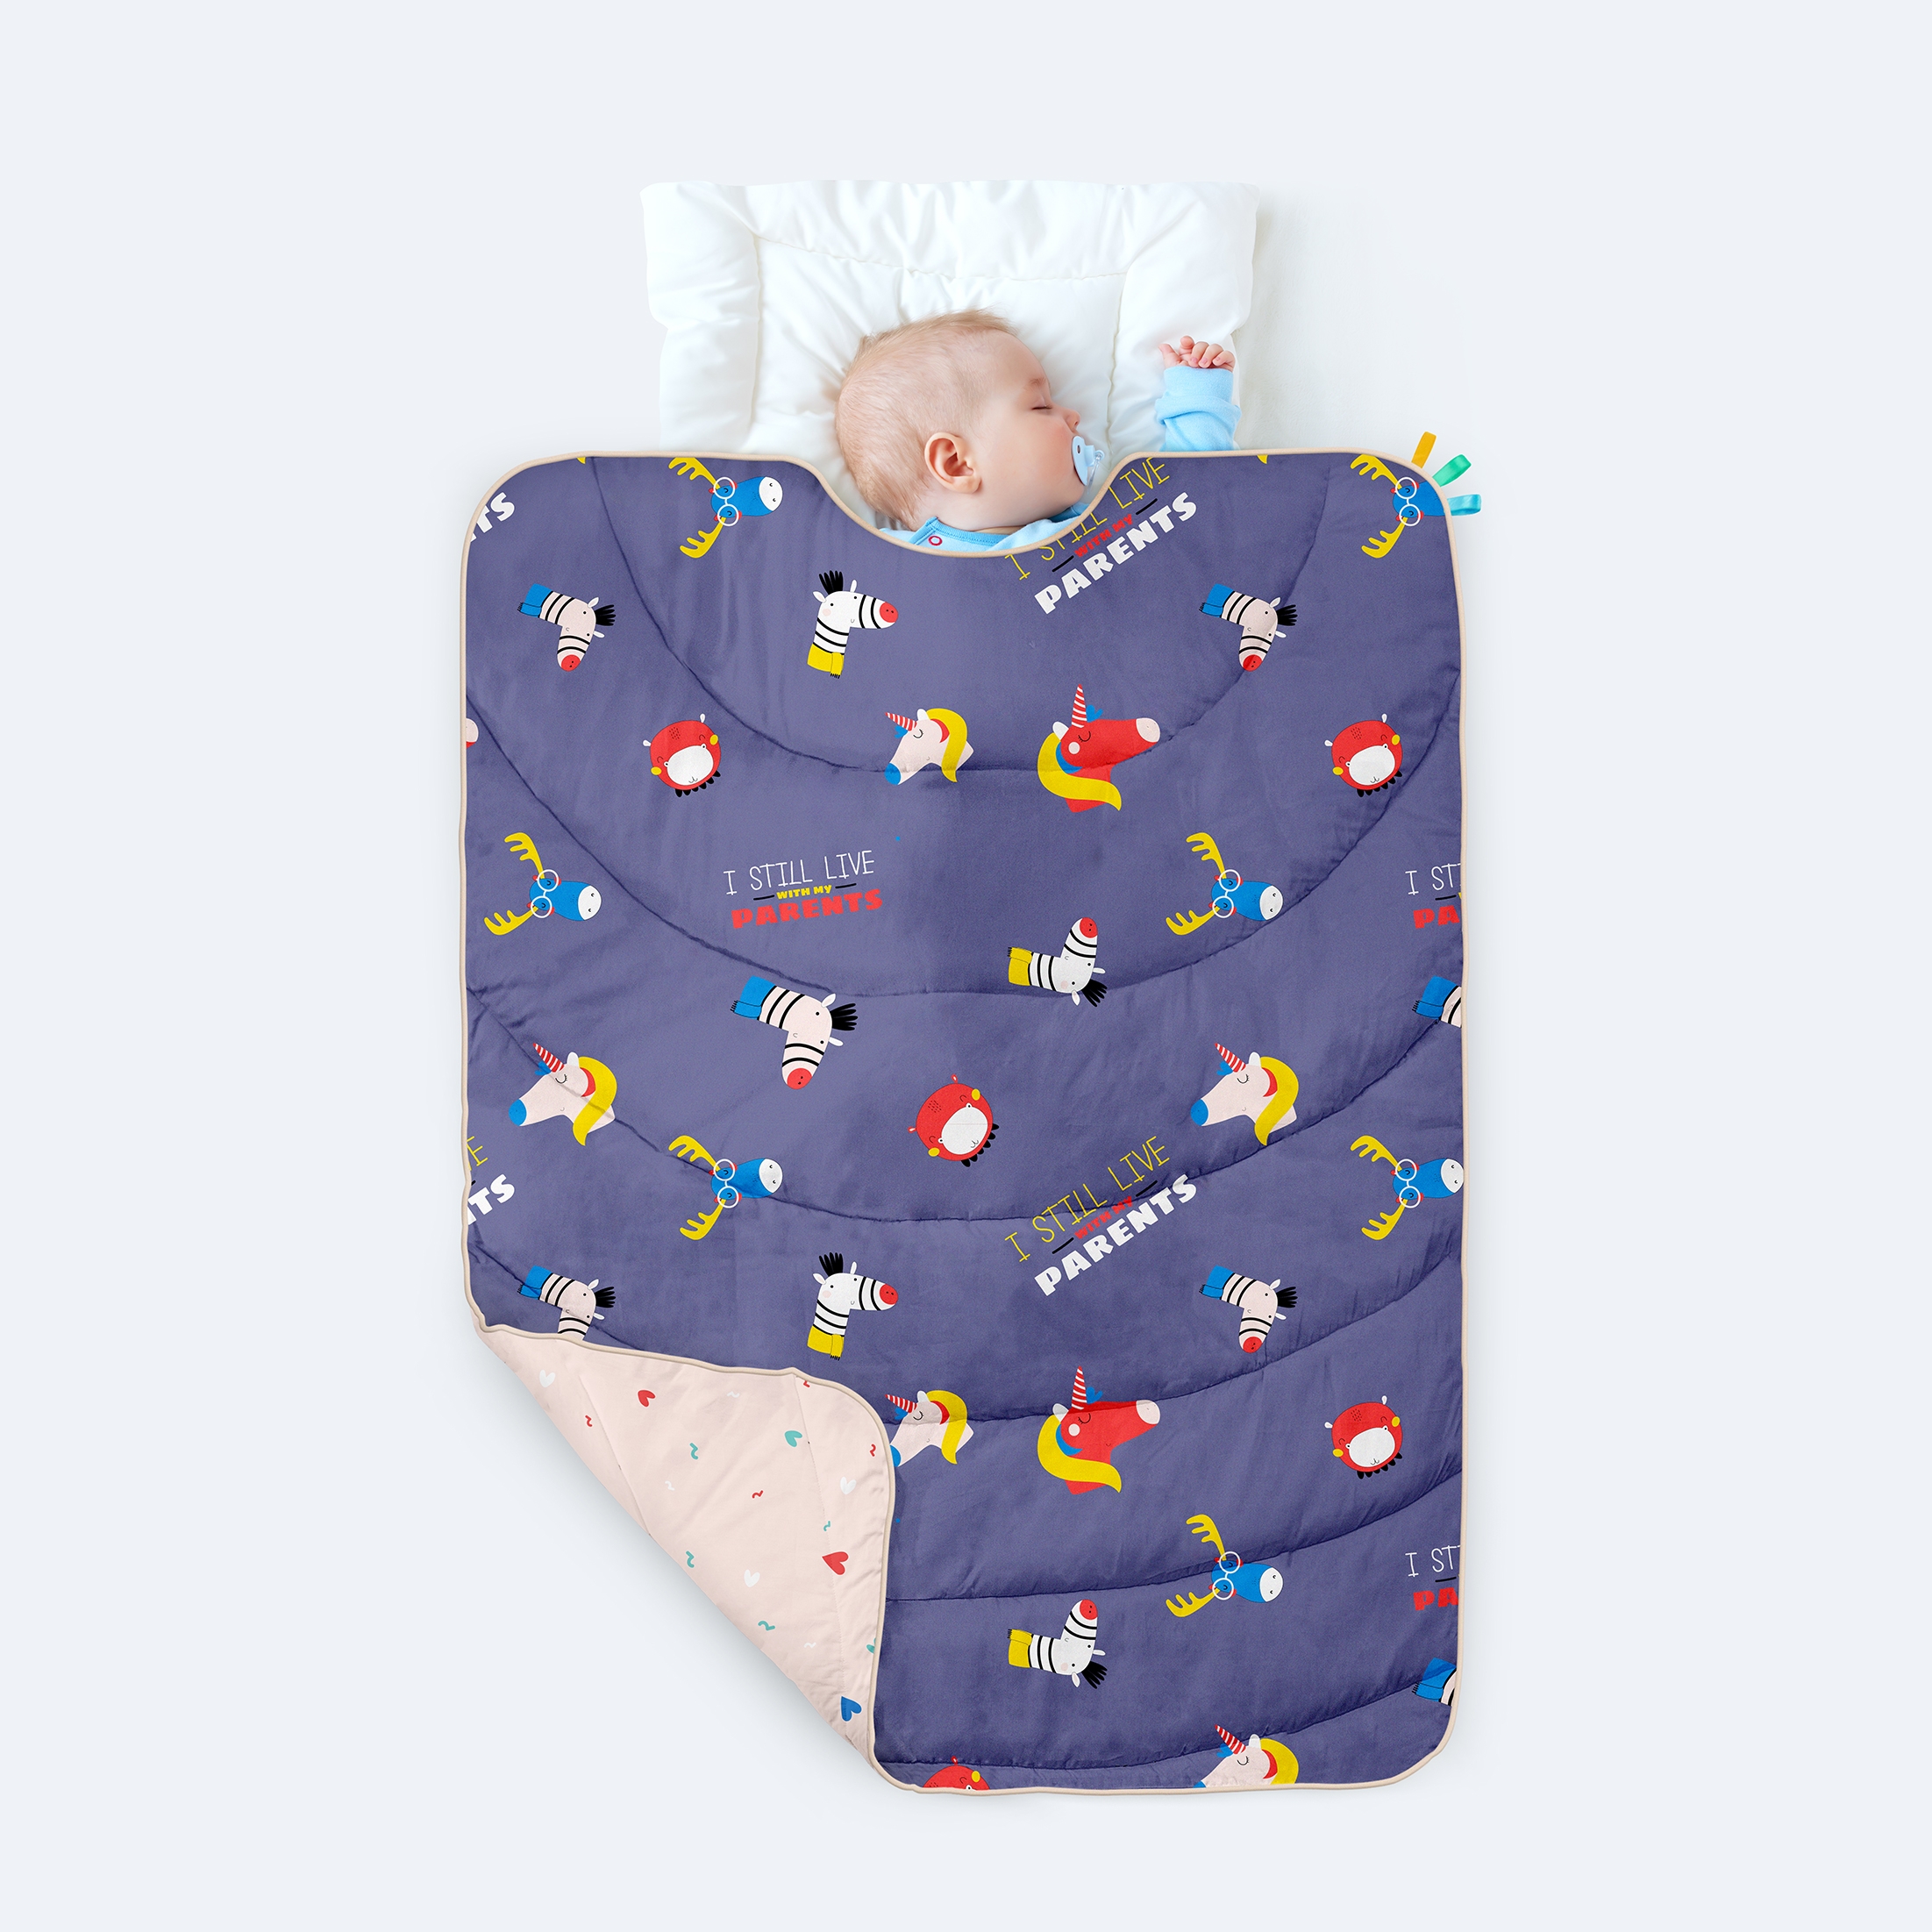 Rabitat 100% Organic Cotton All Weather Quilt - Totally Adorable